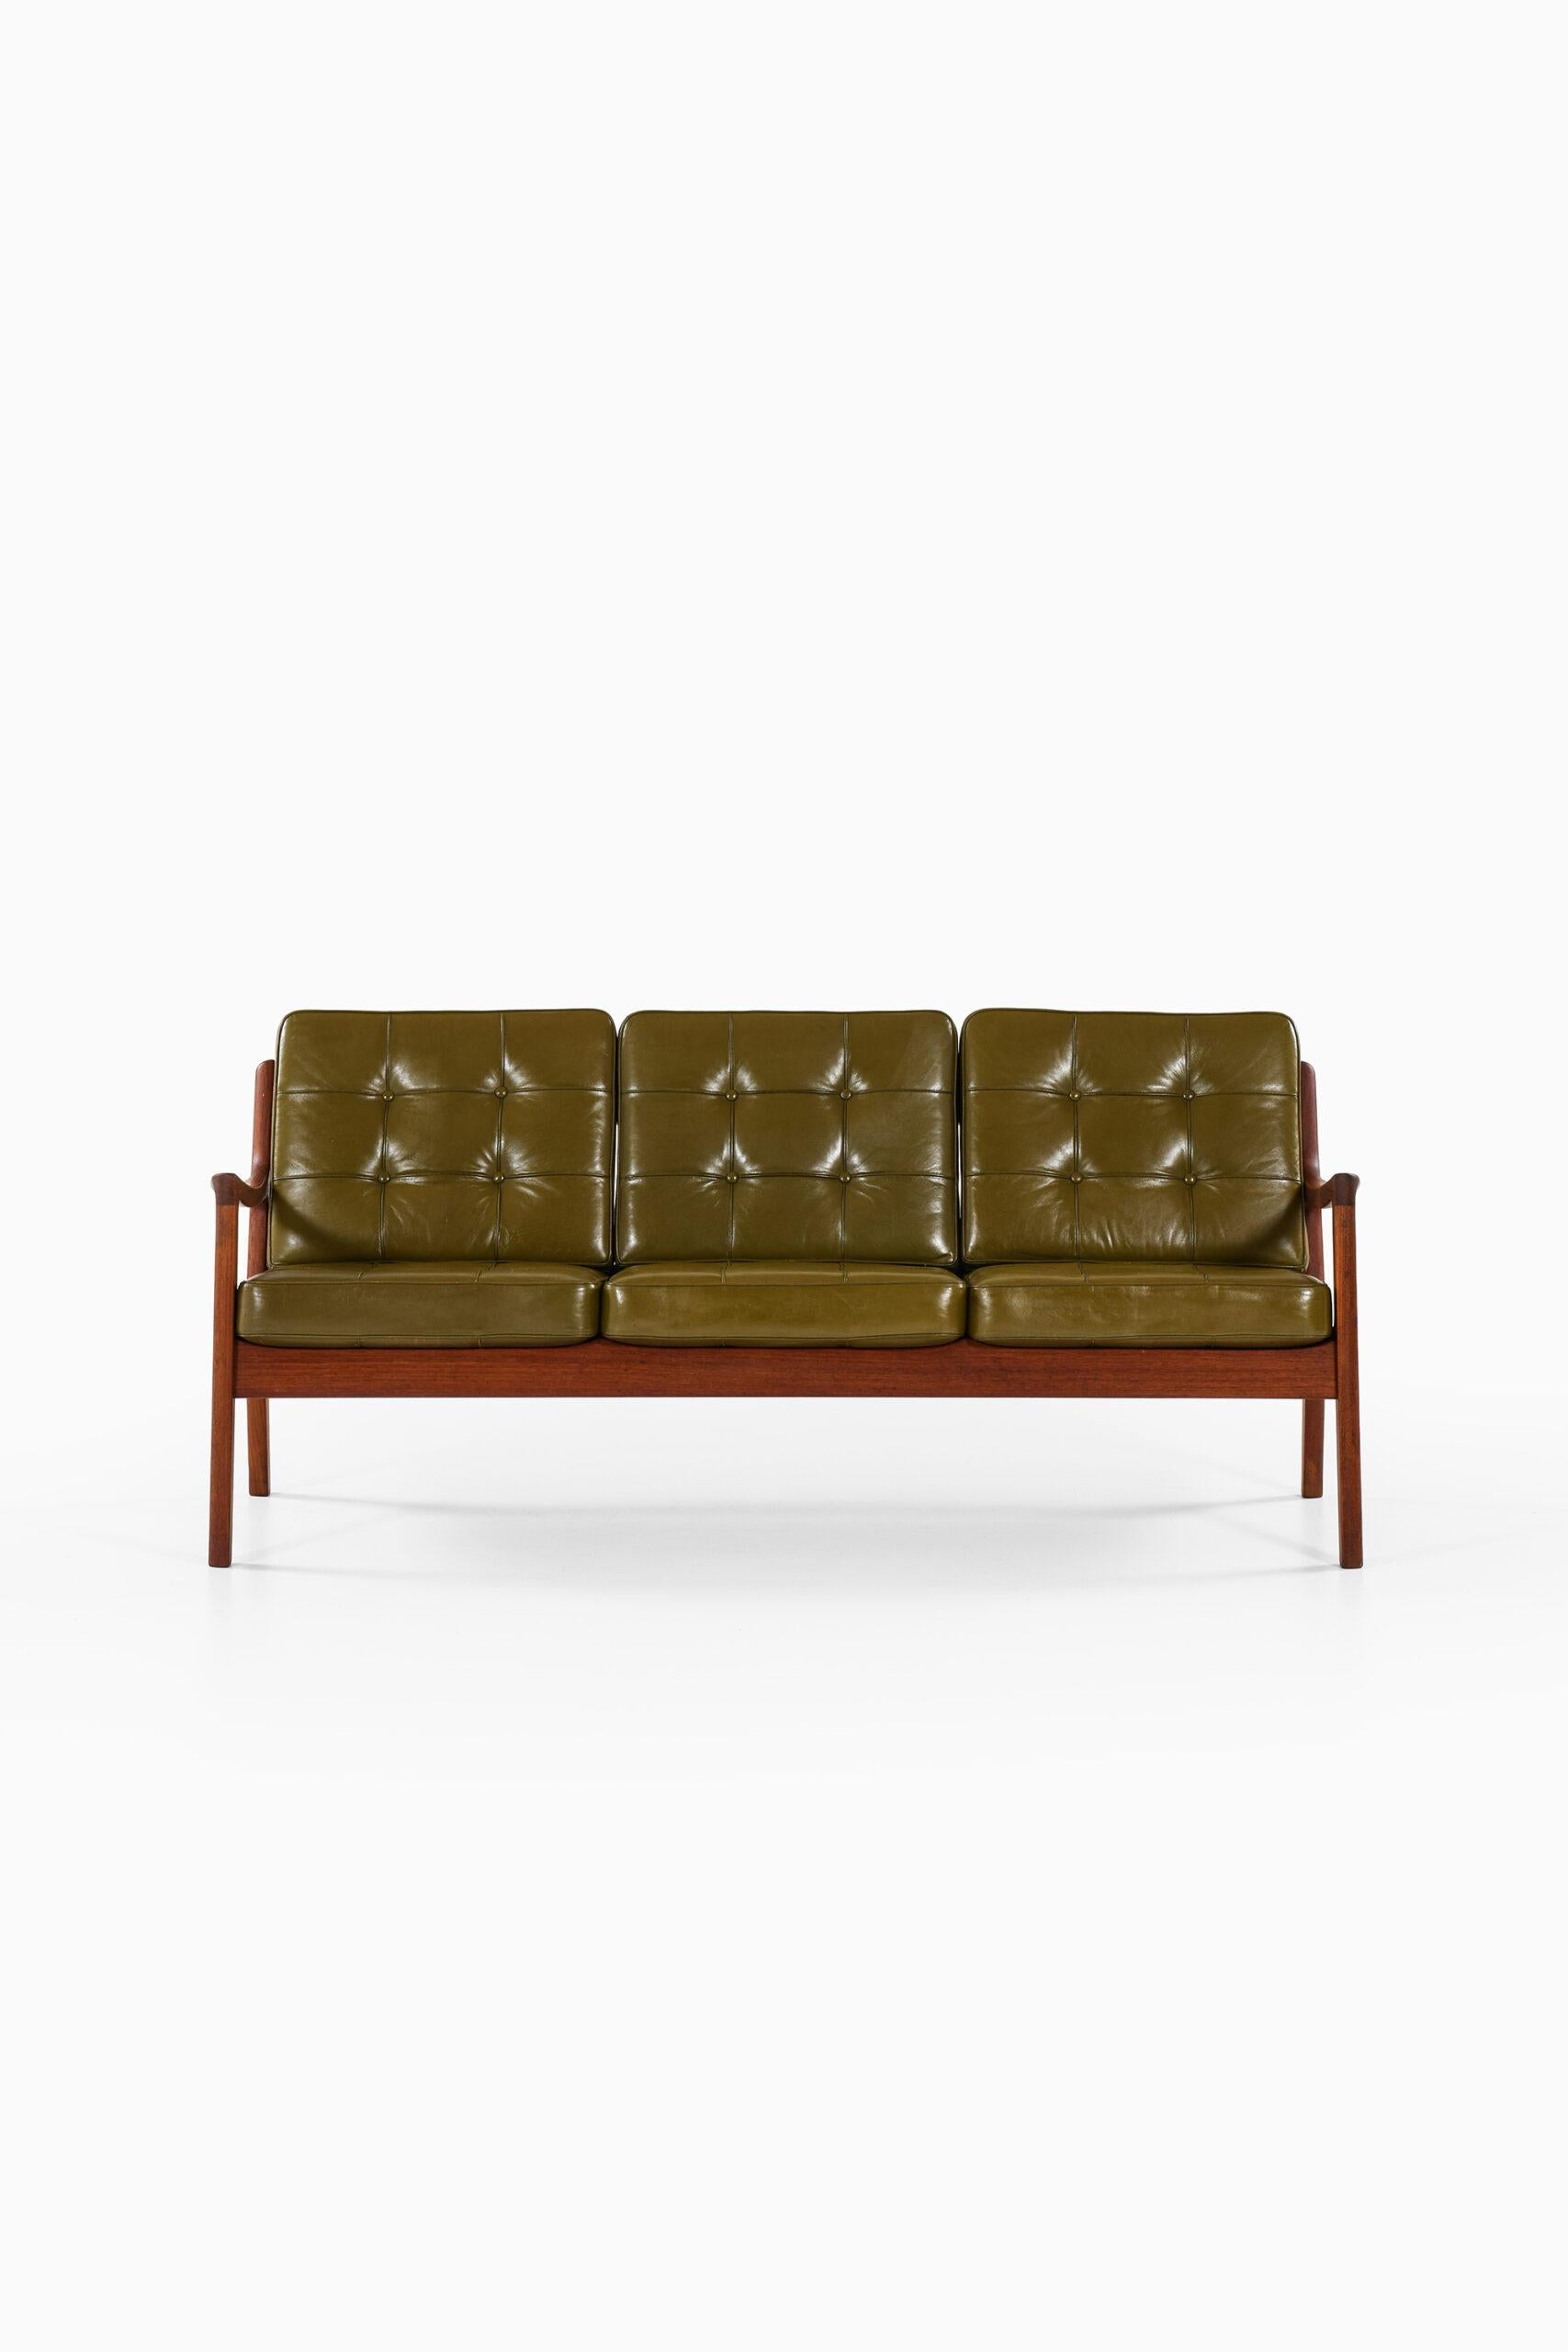 Rare sofa model 116 / Senator designed by Ole Wanscher. Produced by France & Son in Denmark.